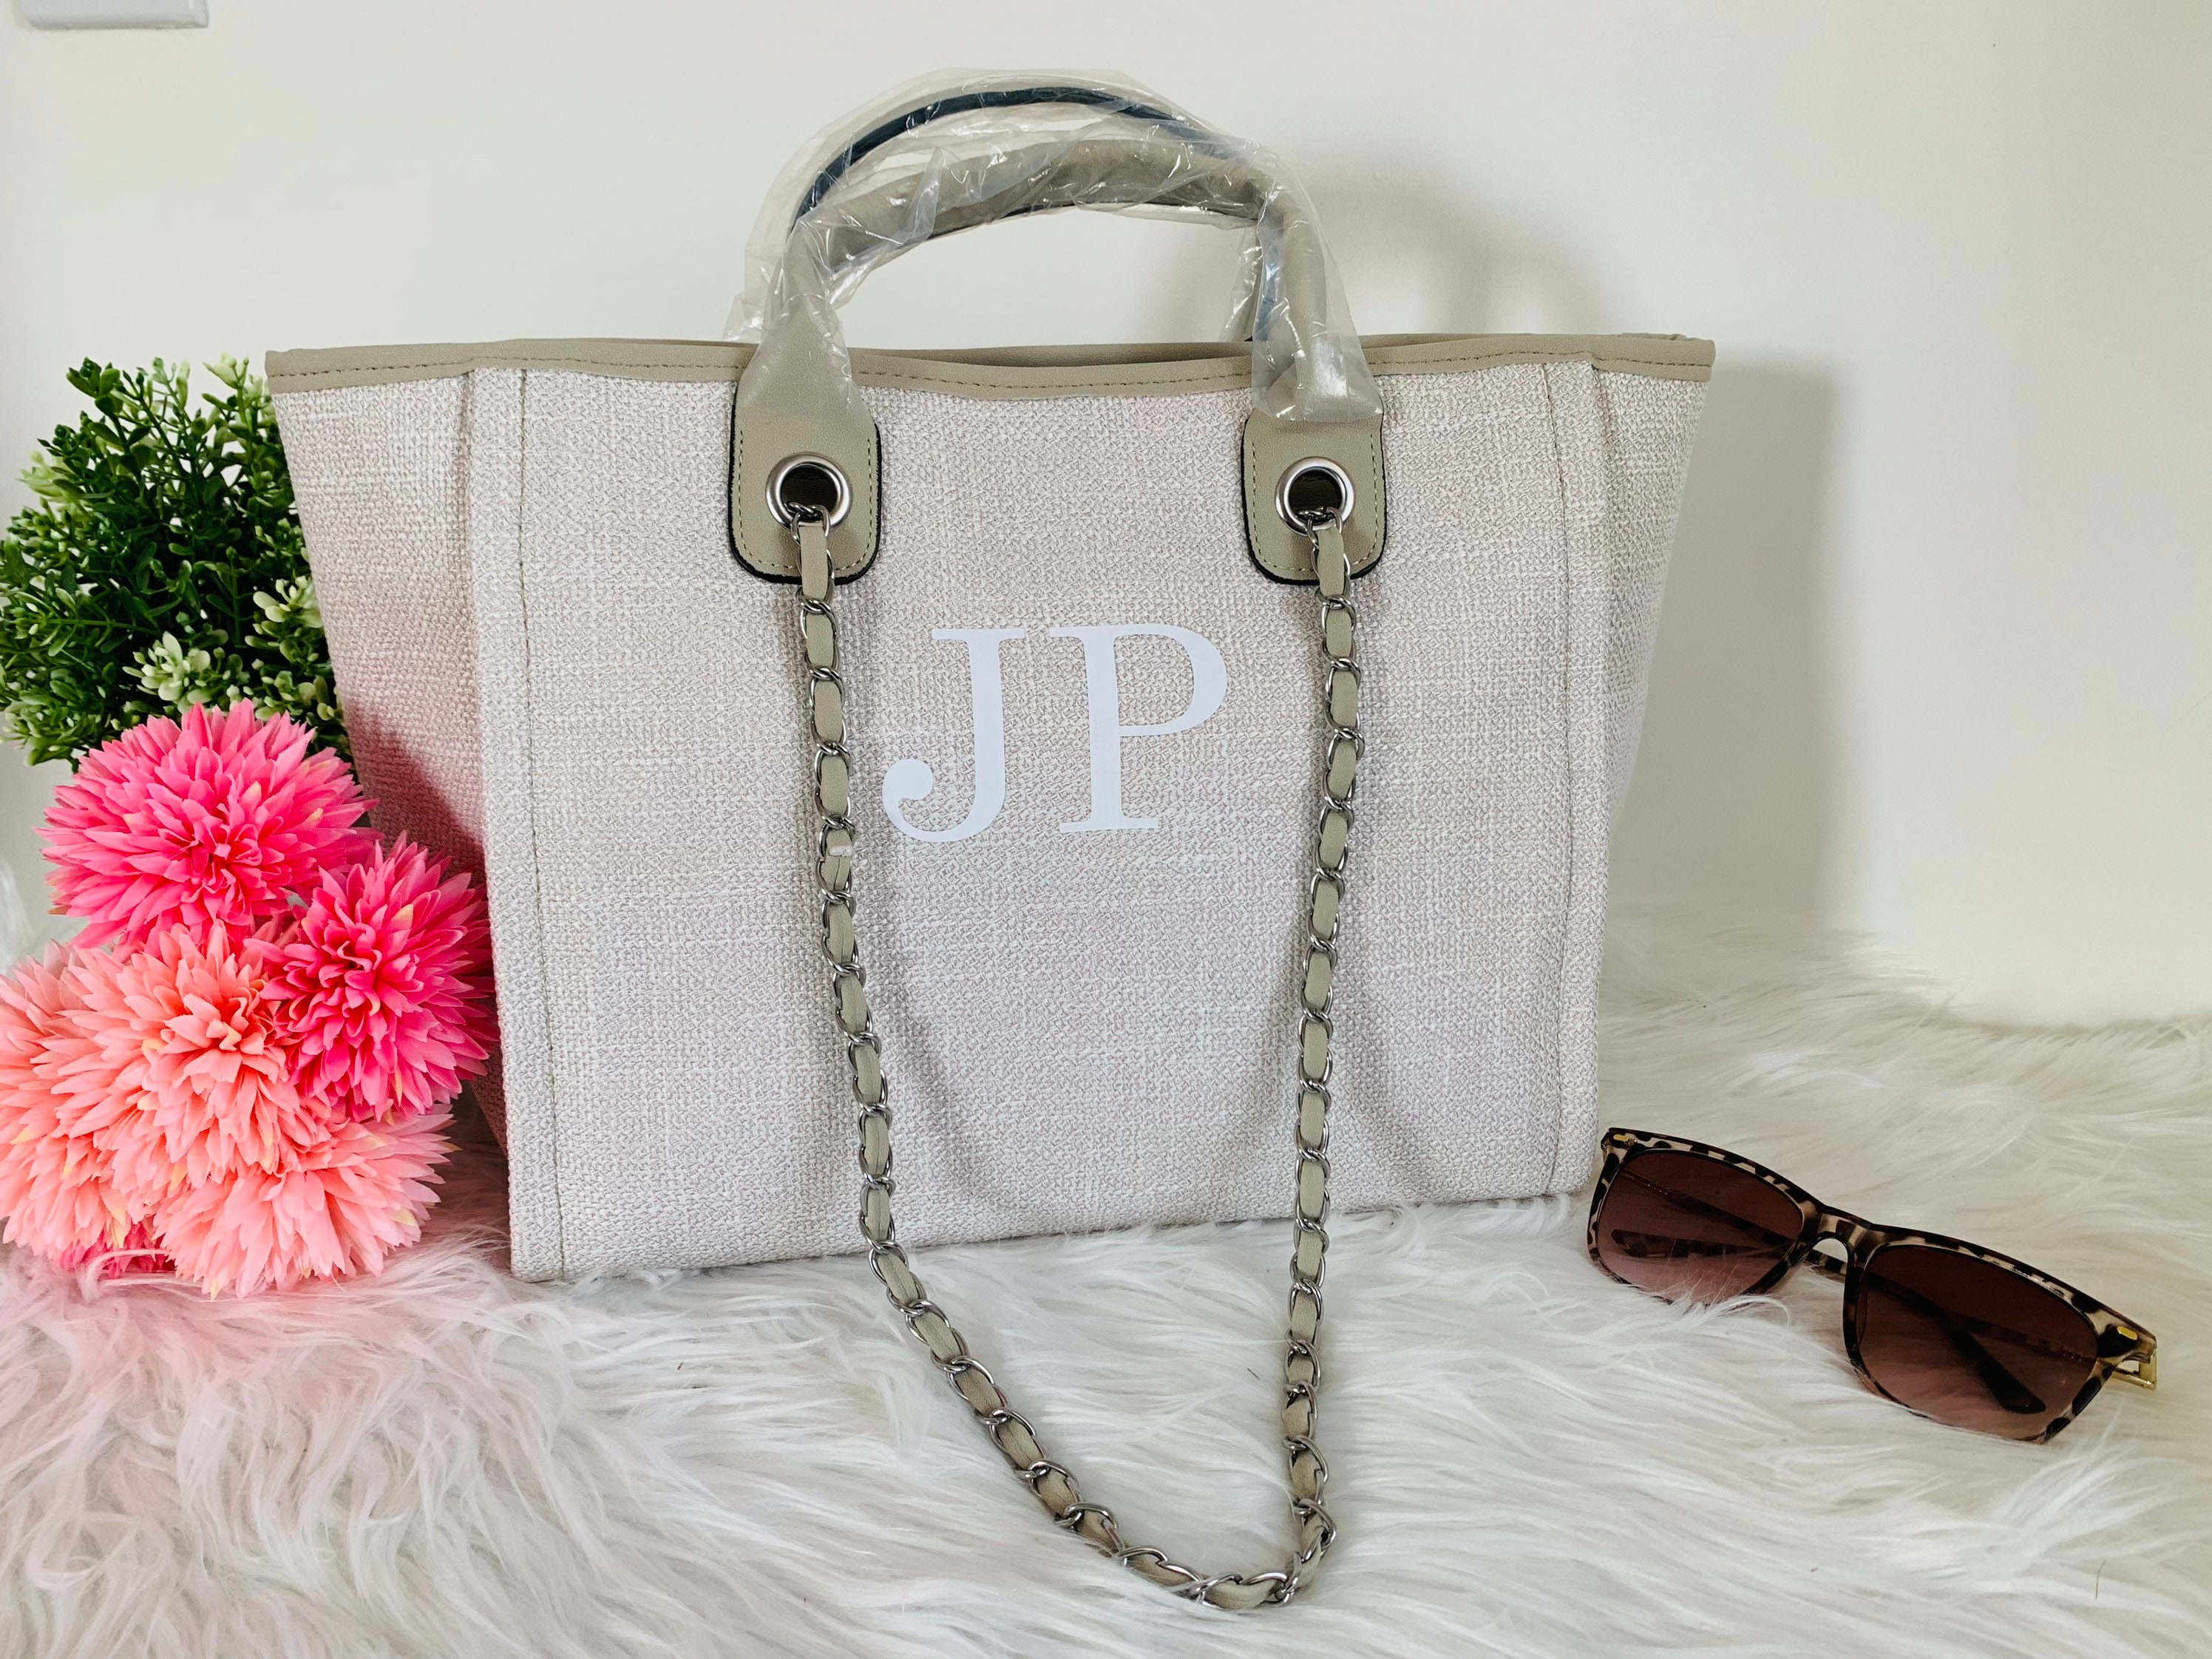 Large Luxury Customized Monogram Tote Bag, Canvas Chain Beach Shopping Tote  Bag, Personalized Weekend Hand Bag, Luxe Chain Bag